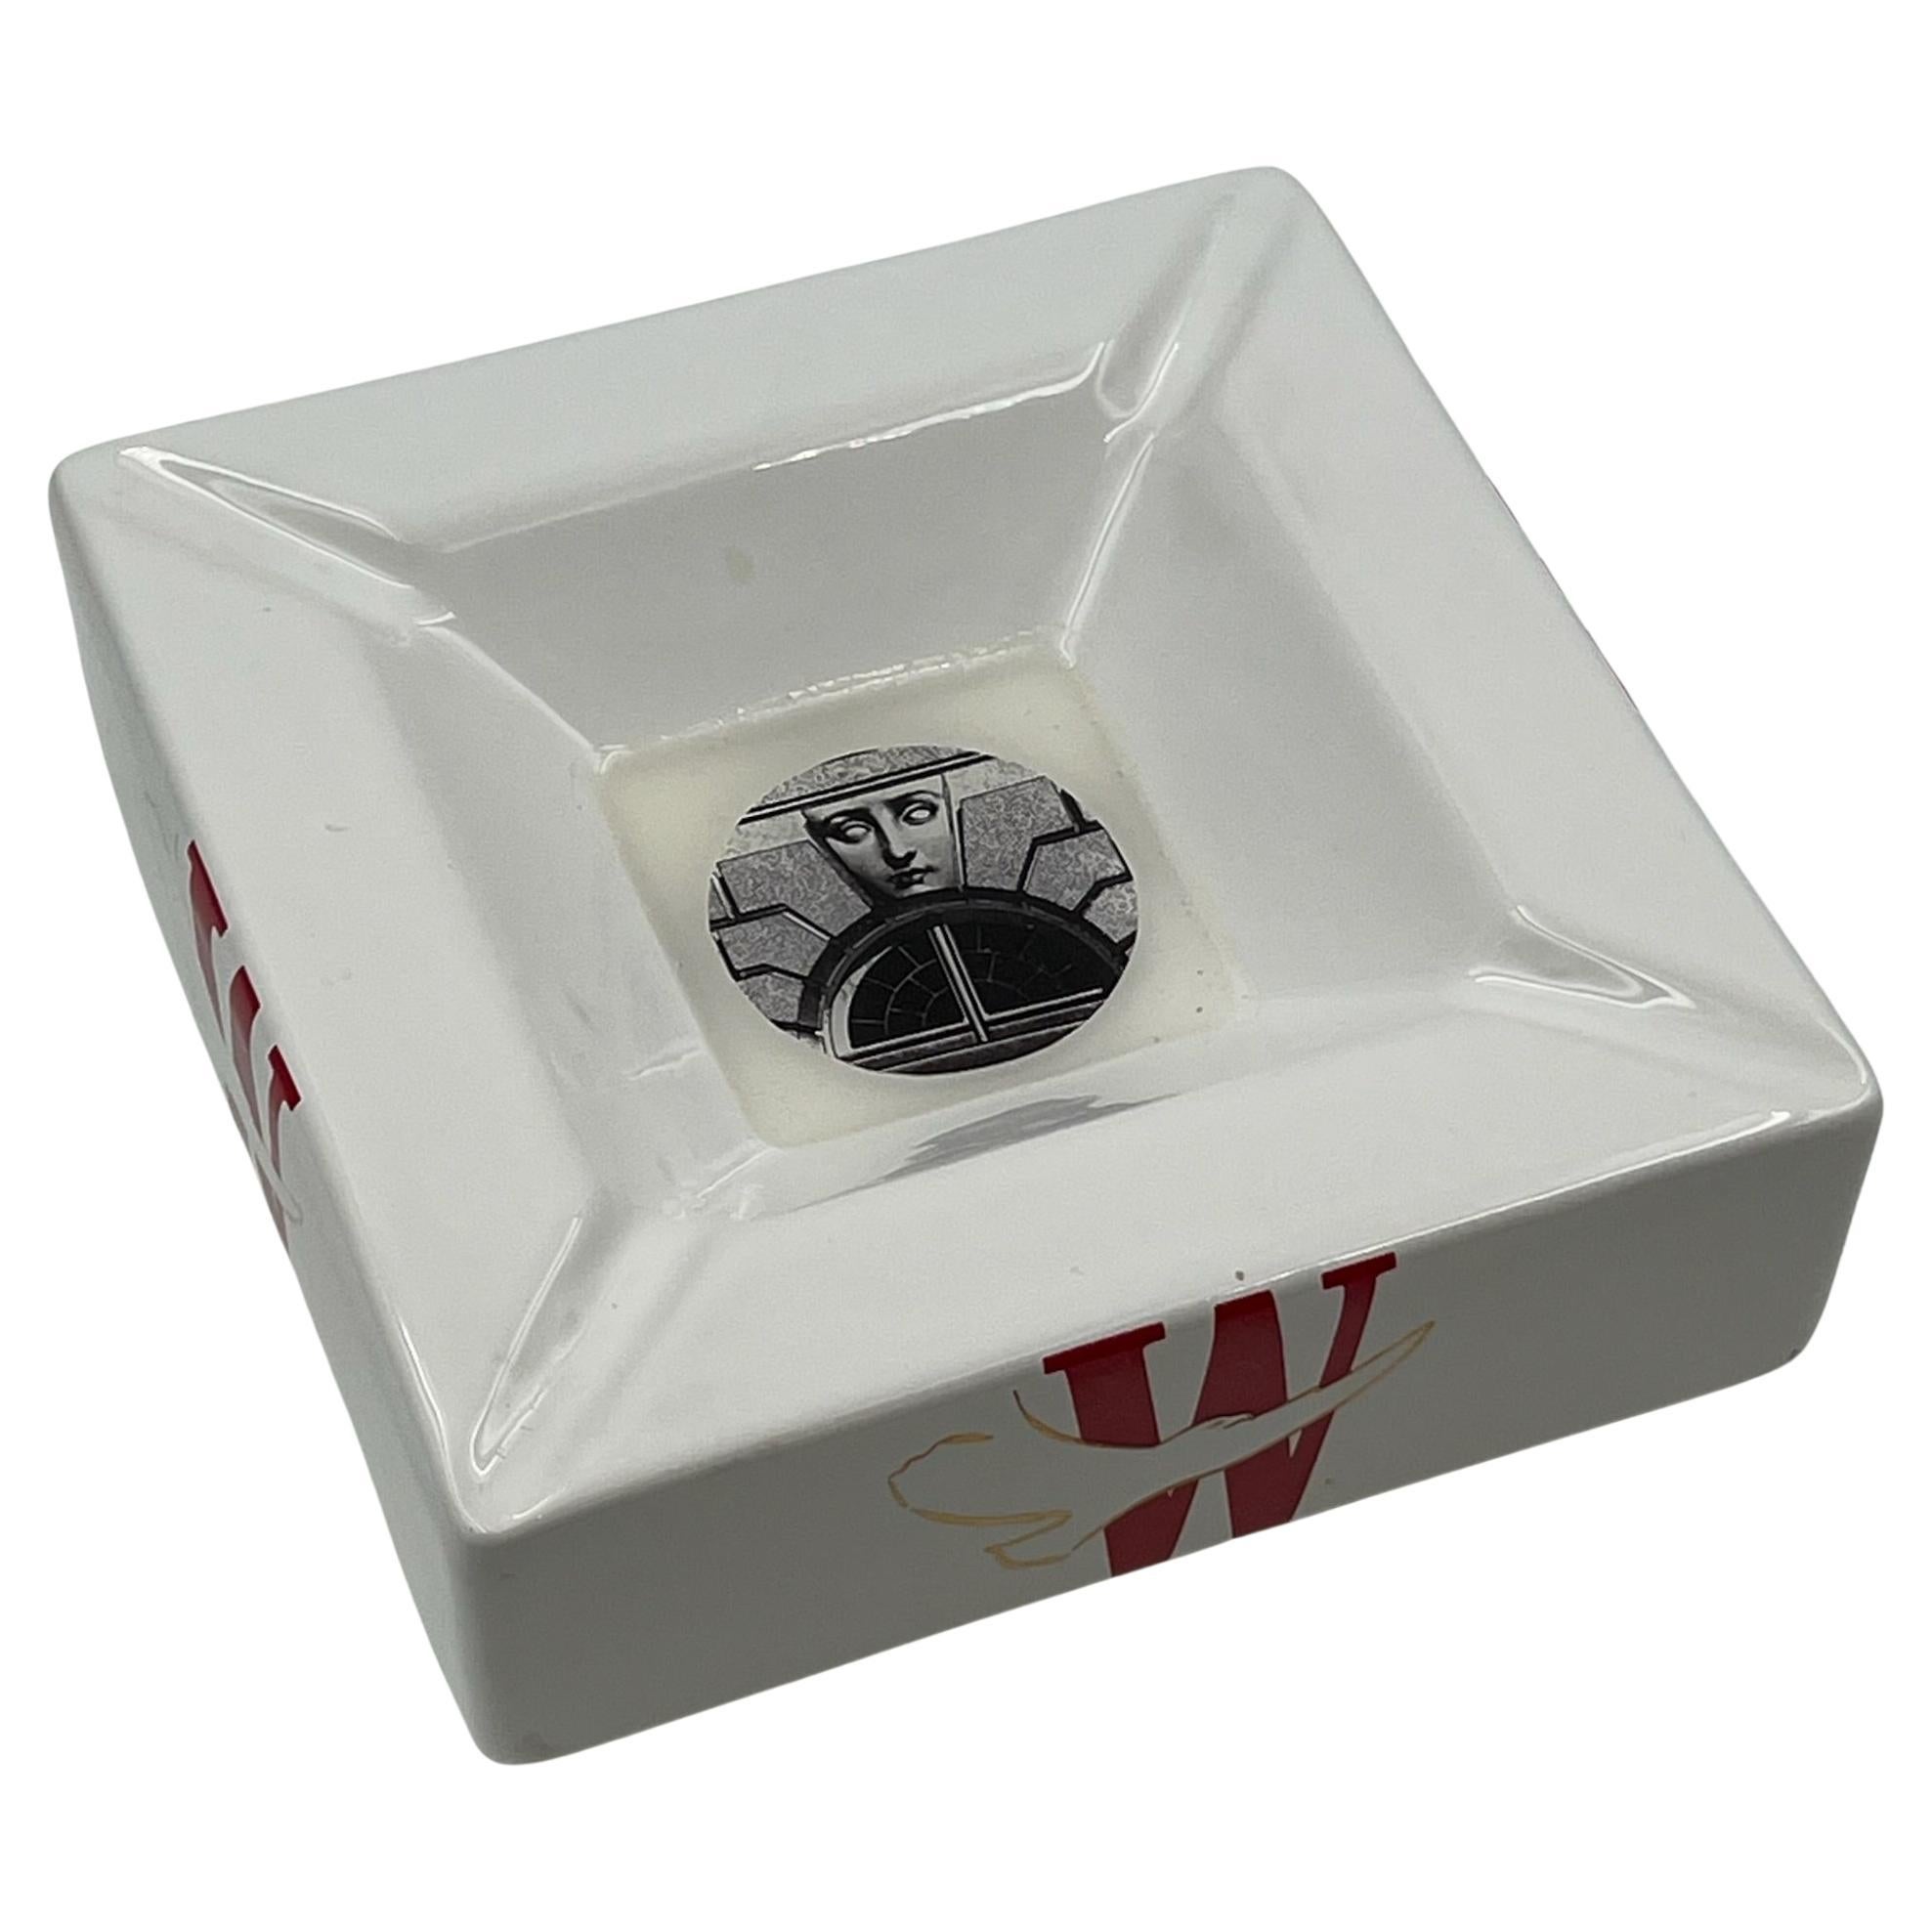 Vintage Fornasetti 70s for Winston - Collectible Ceramic Ashtray, Variazione 212 For Sale